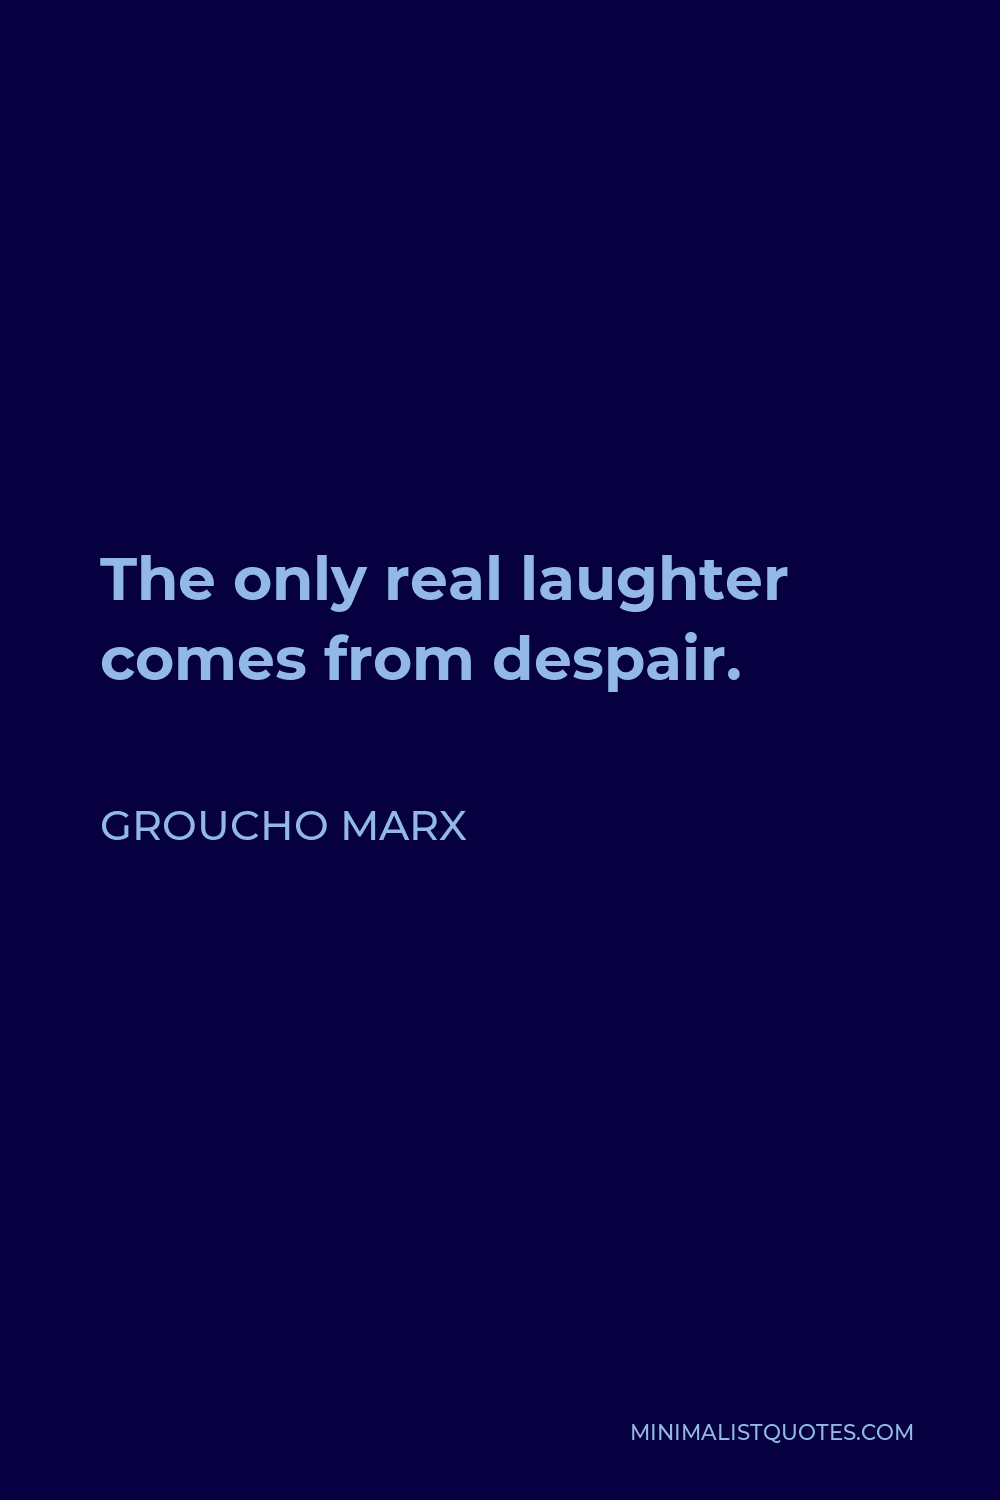 Groucho Marx Quote - The only real laughter comes from despair.